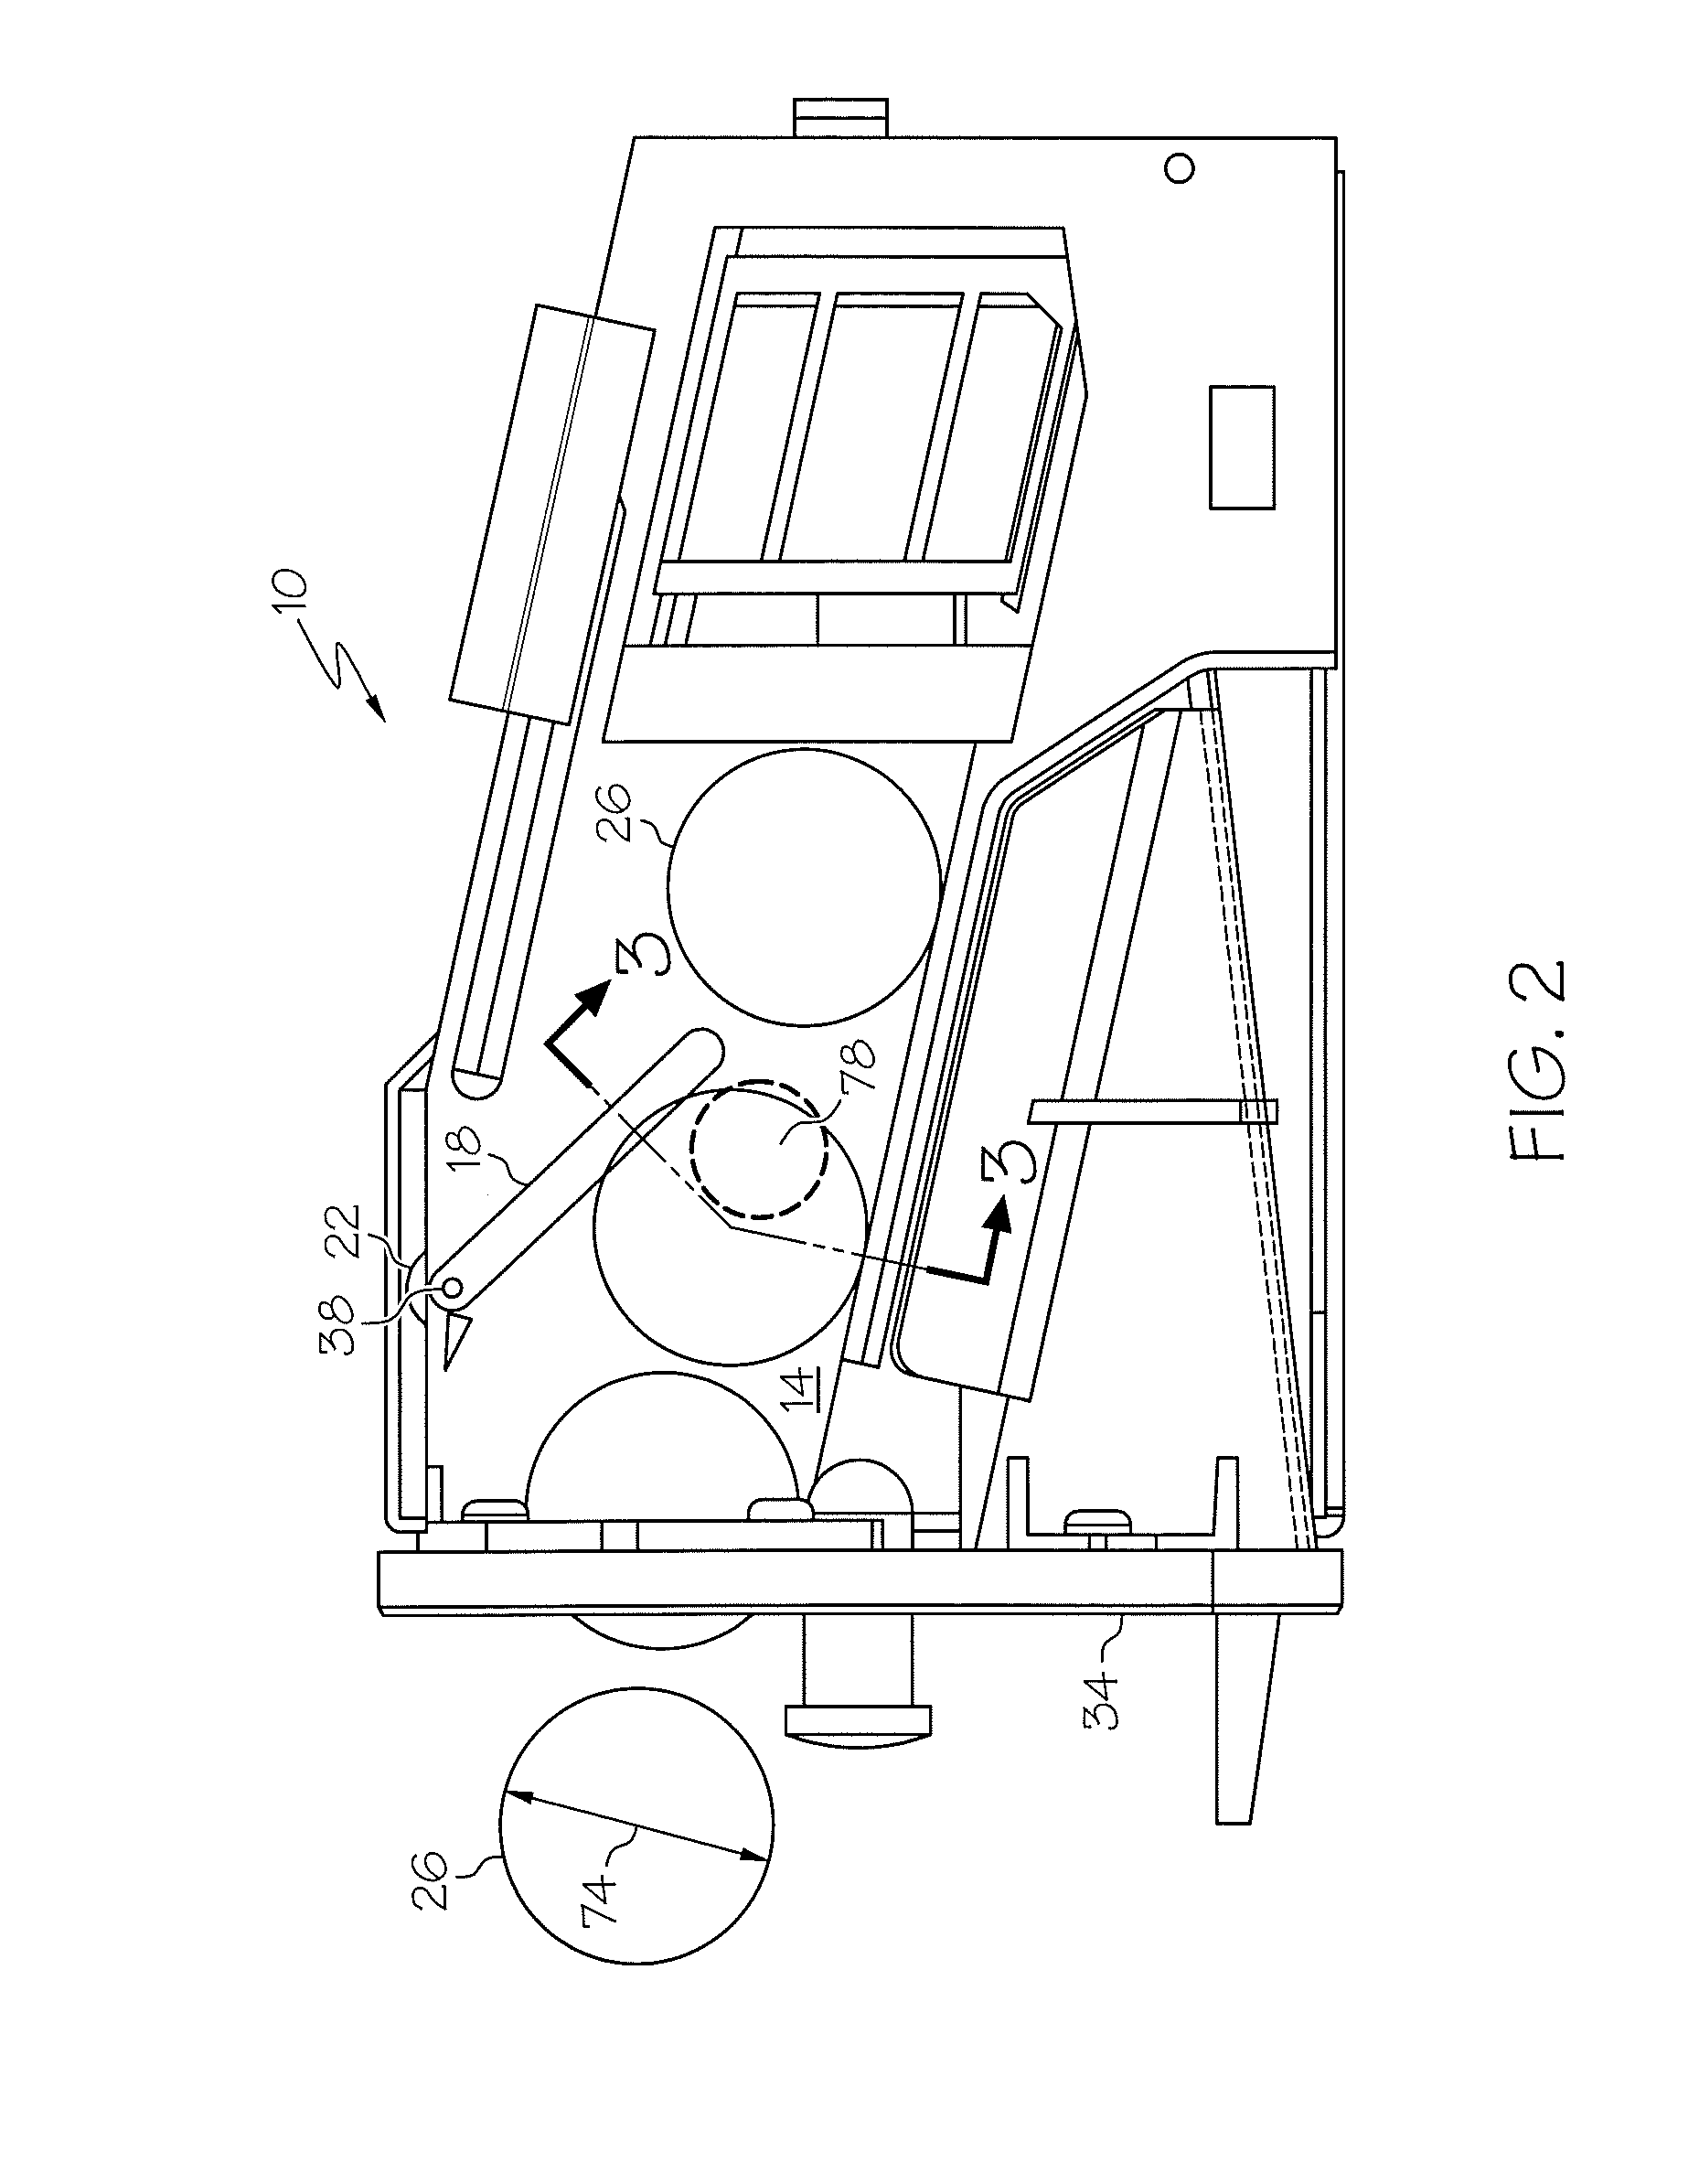 Media recognition device and method